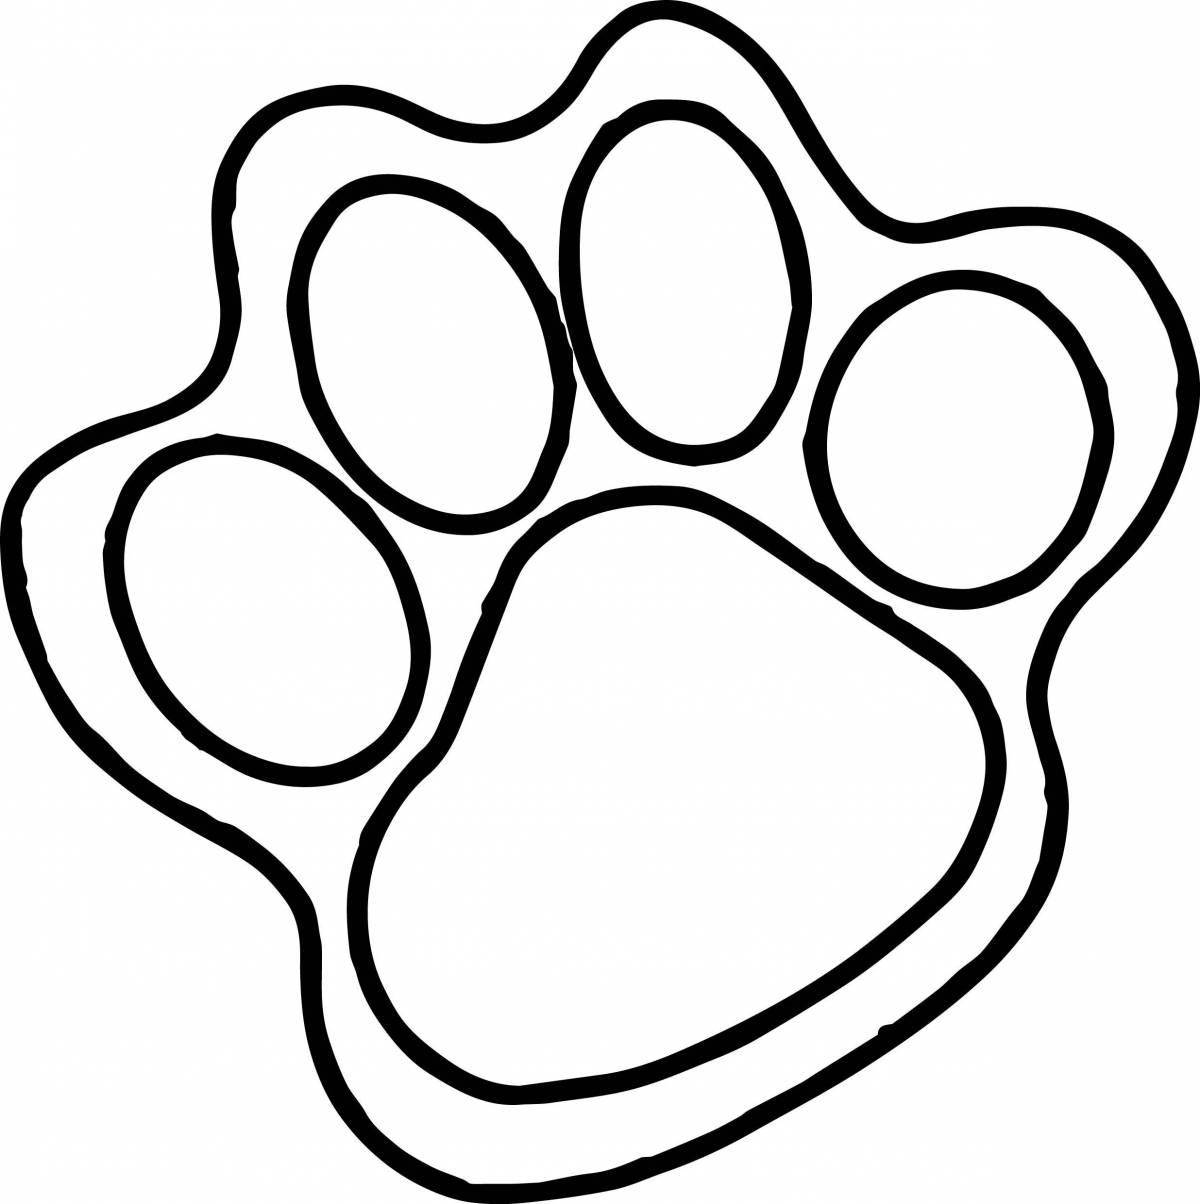 Coloring page gorgeous cat's paw